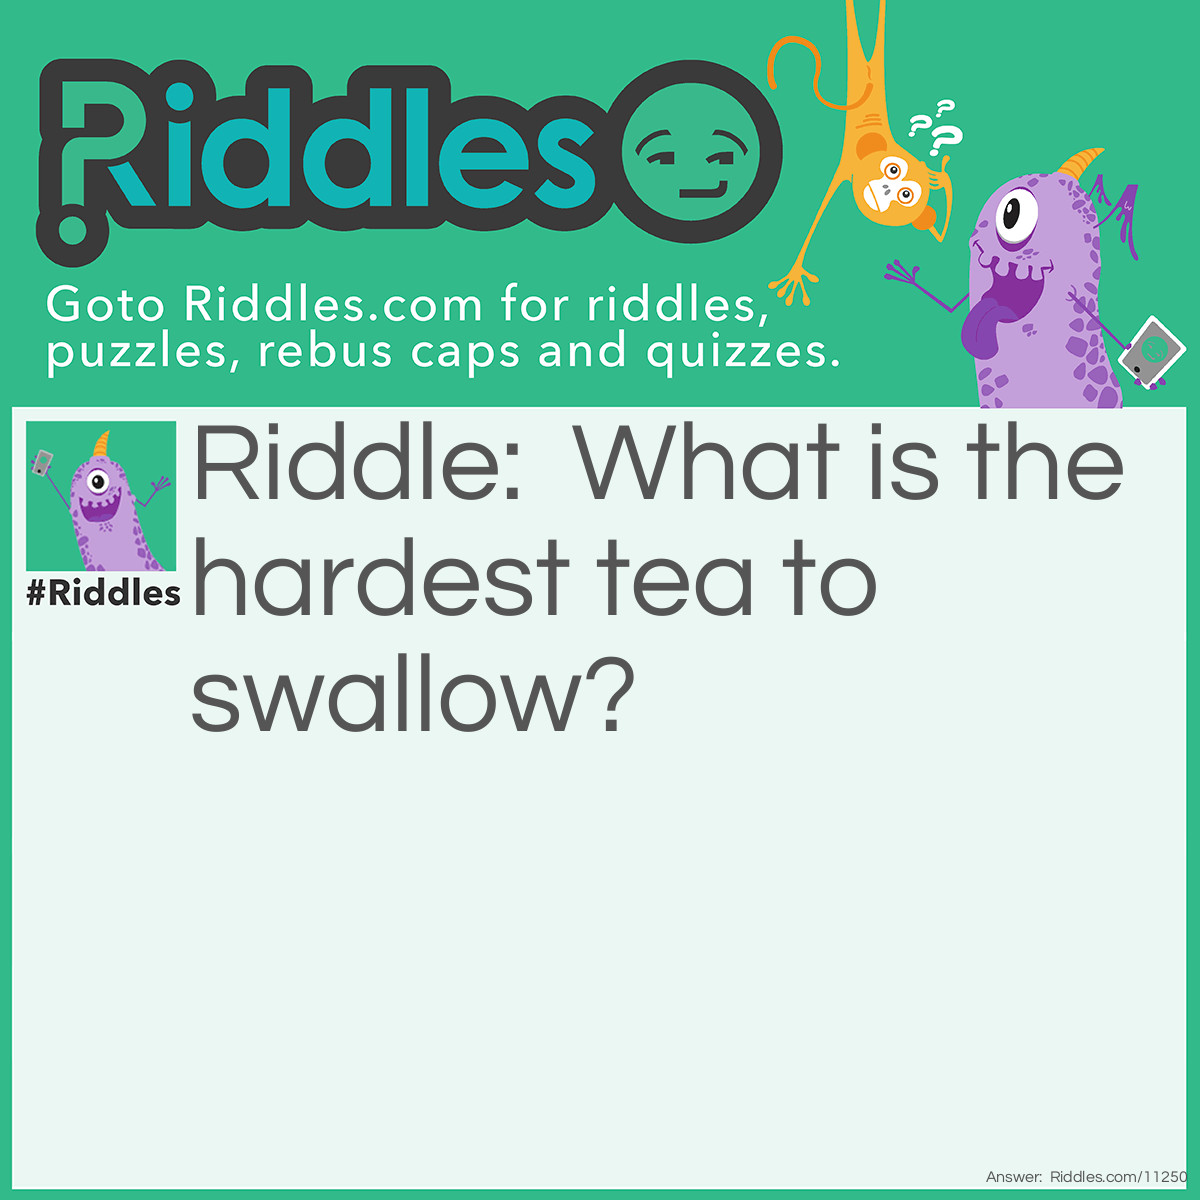 Riddle: What is the hardest tea to swallow? Answer: Reality.